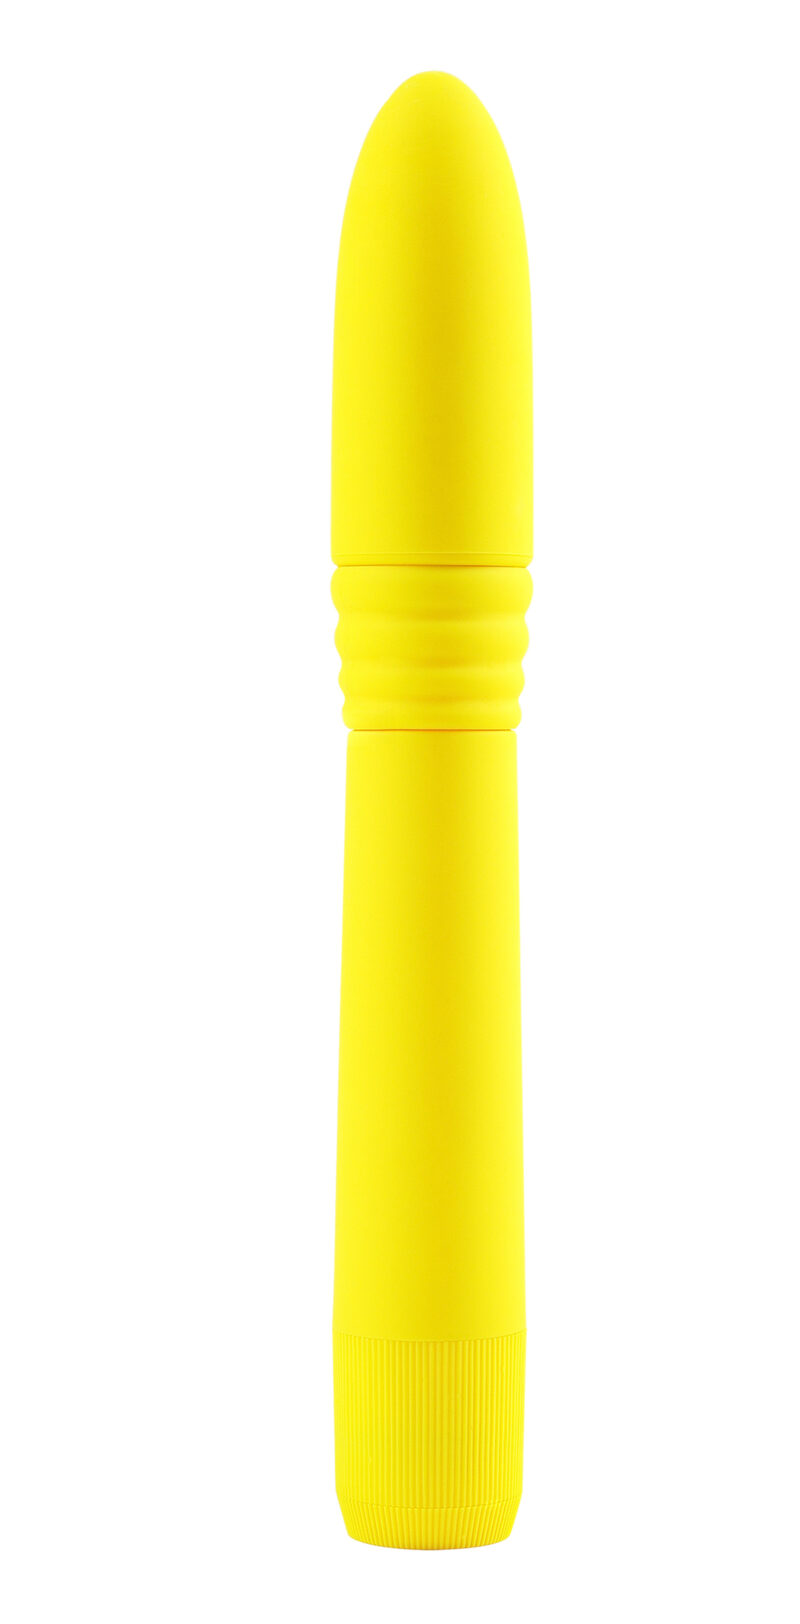 Pipedream Neon Luv Touch Ribbed Slim Vibrator Yellow